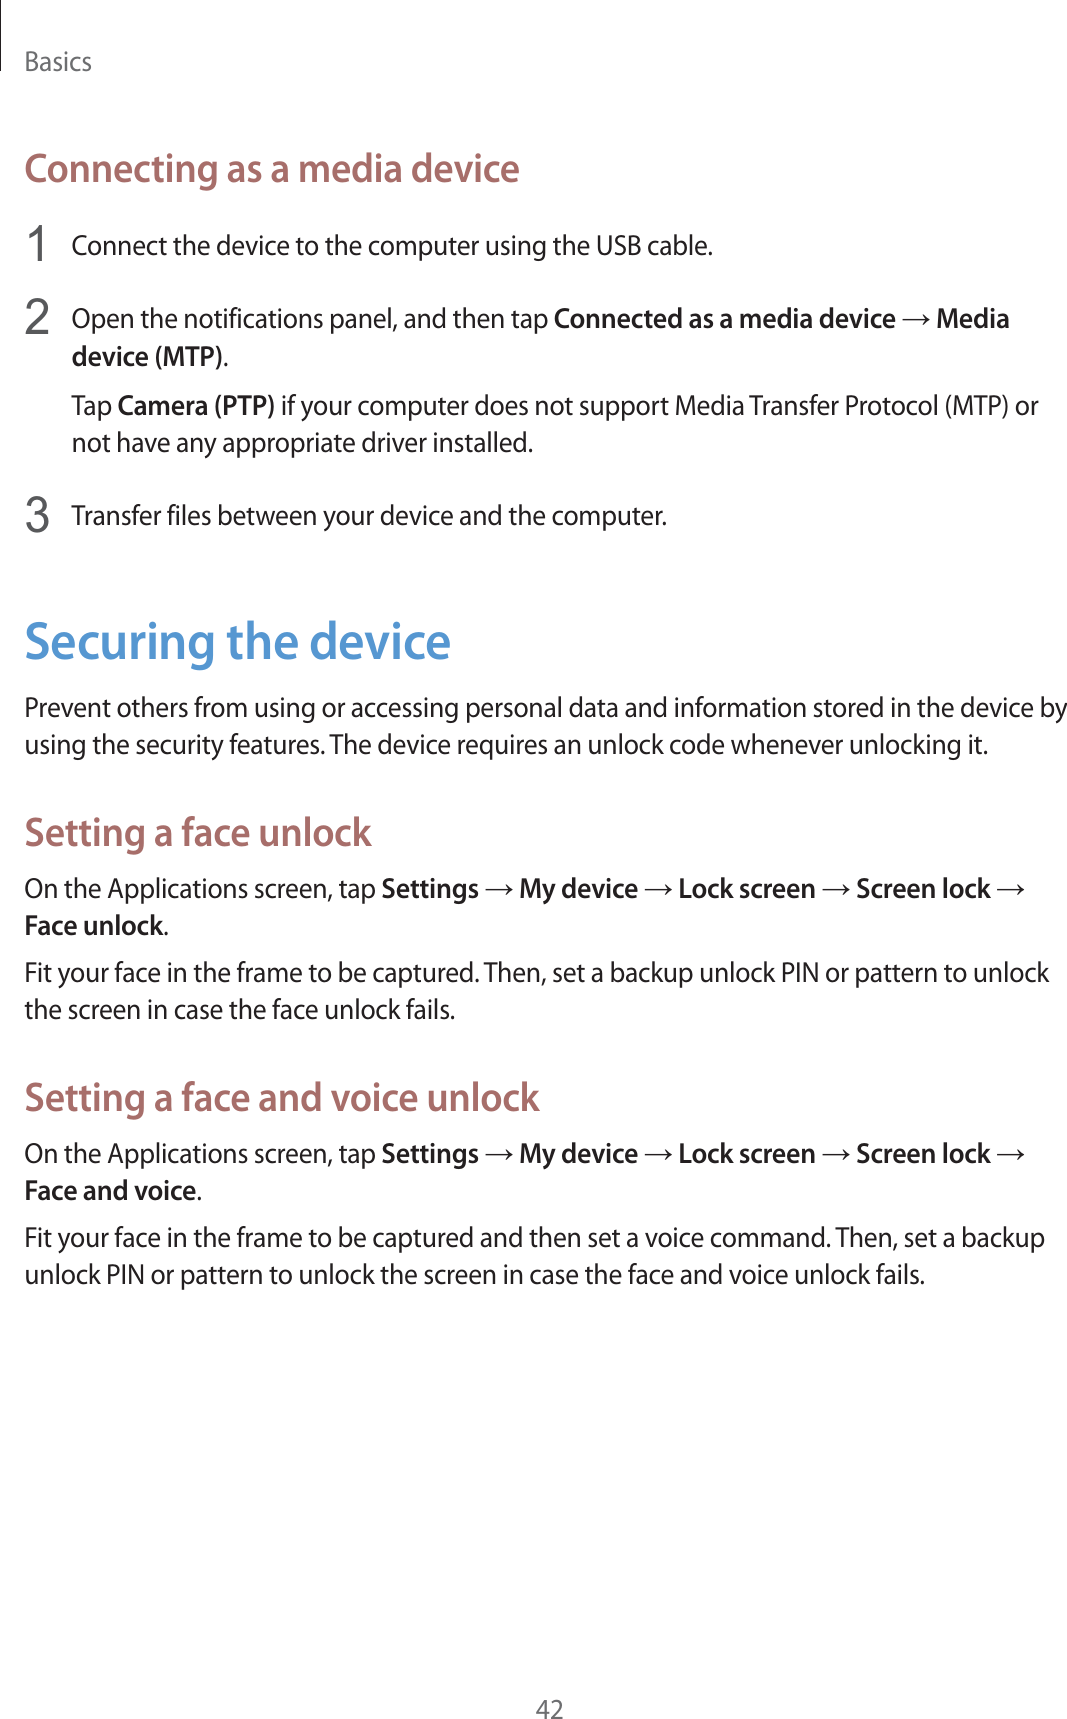 Basics42Connecting as a media device1Connect the device to the computer using the USB cable.2Open the notifications panel, and then tap Connected as a media device  Media device (MTP).Tap Camera (PTP) if your computer does not support Media Transfer Protocol (MTP) or not have any appropriate driver installed.3Transfer files between your device and the computer.Securing the devicePrevent others from using or accessing personal data and information stored in the device by using the security features. The device requires an unlock code whenever unlocking it.Setting a face unlockOn the Applications screen, tap Settings  My device  Lock screen  Screen lock  Face unlock.Fit your face in the frame to be captured. Then, set a backup unlock PIN or pattern to unlock the screen in case the face unlock fails.Setting a face and voice unlockOn the Applications screen, tap Settings  My device  Lock screen  Screen lock  Face and voice.Fit your face in the frame to be captured and then set a voice command. Then, set a backup unlock PIN or pattern to unlock the screen in case the face and voice unlock fails.